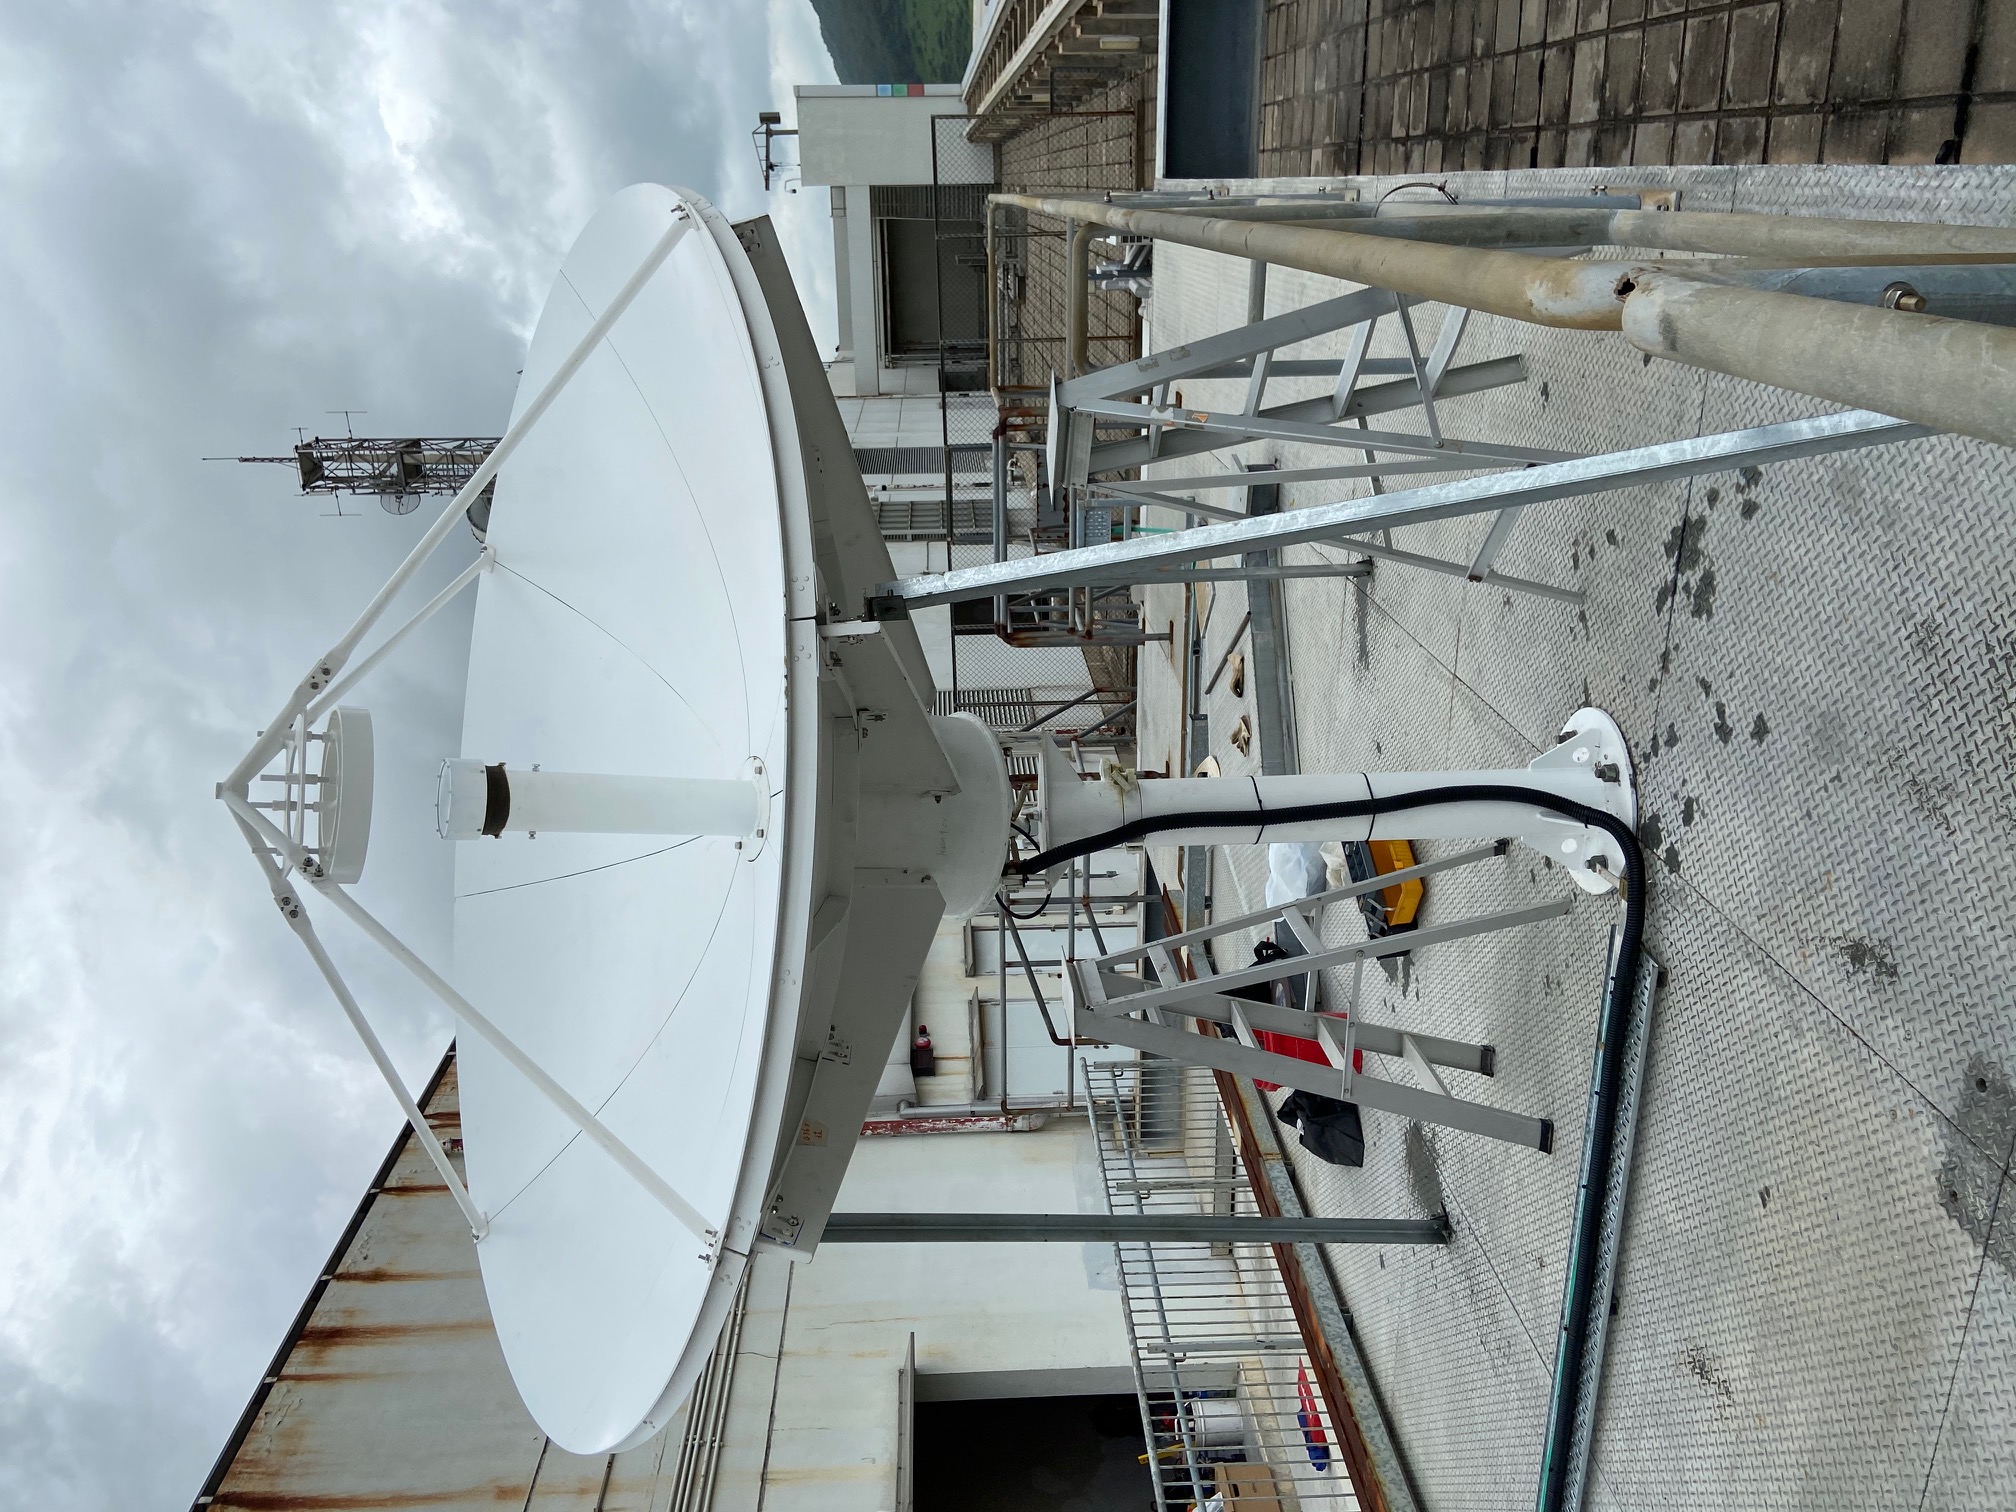 bandpass filter - success stories - install completed - AsiaSat